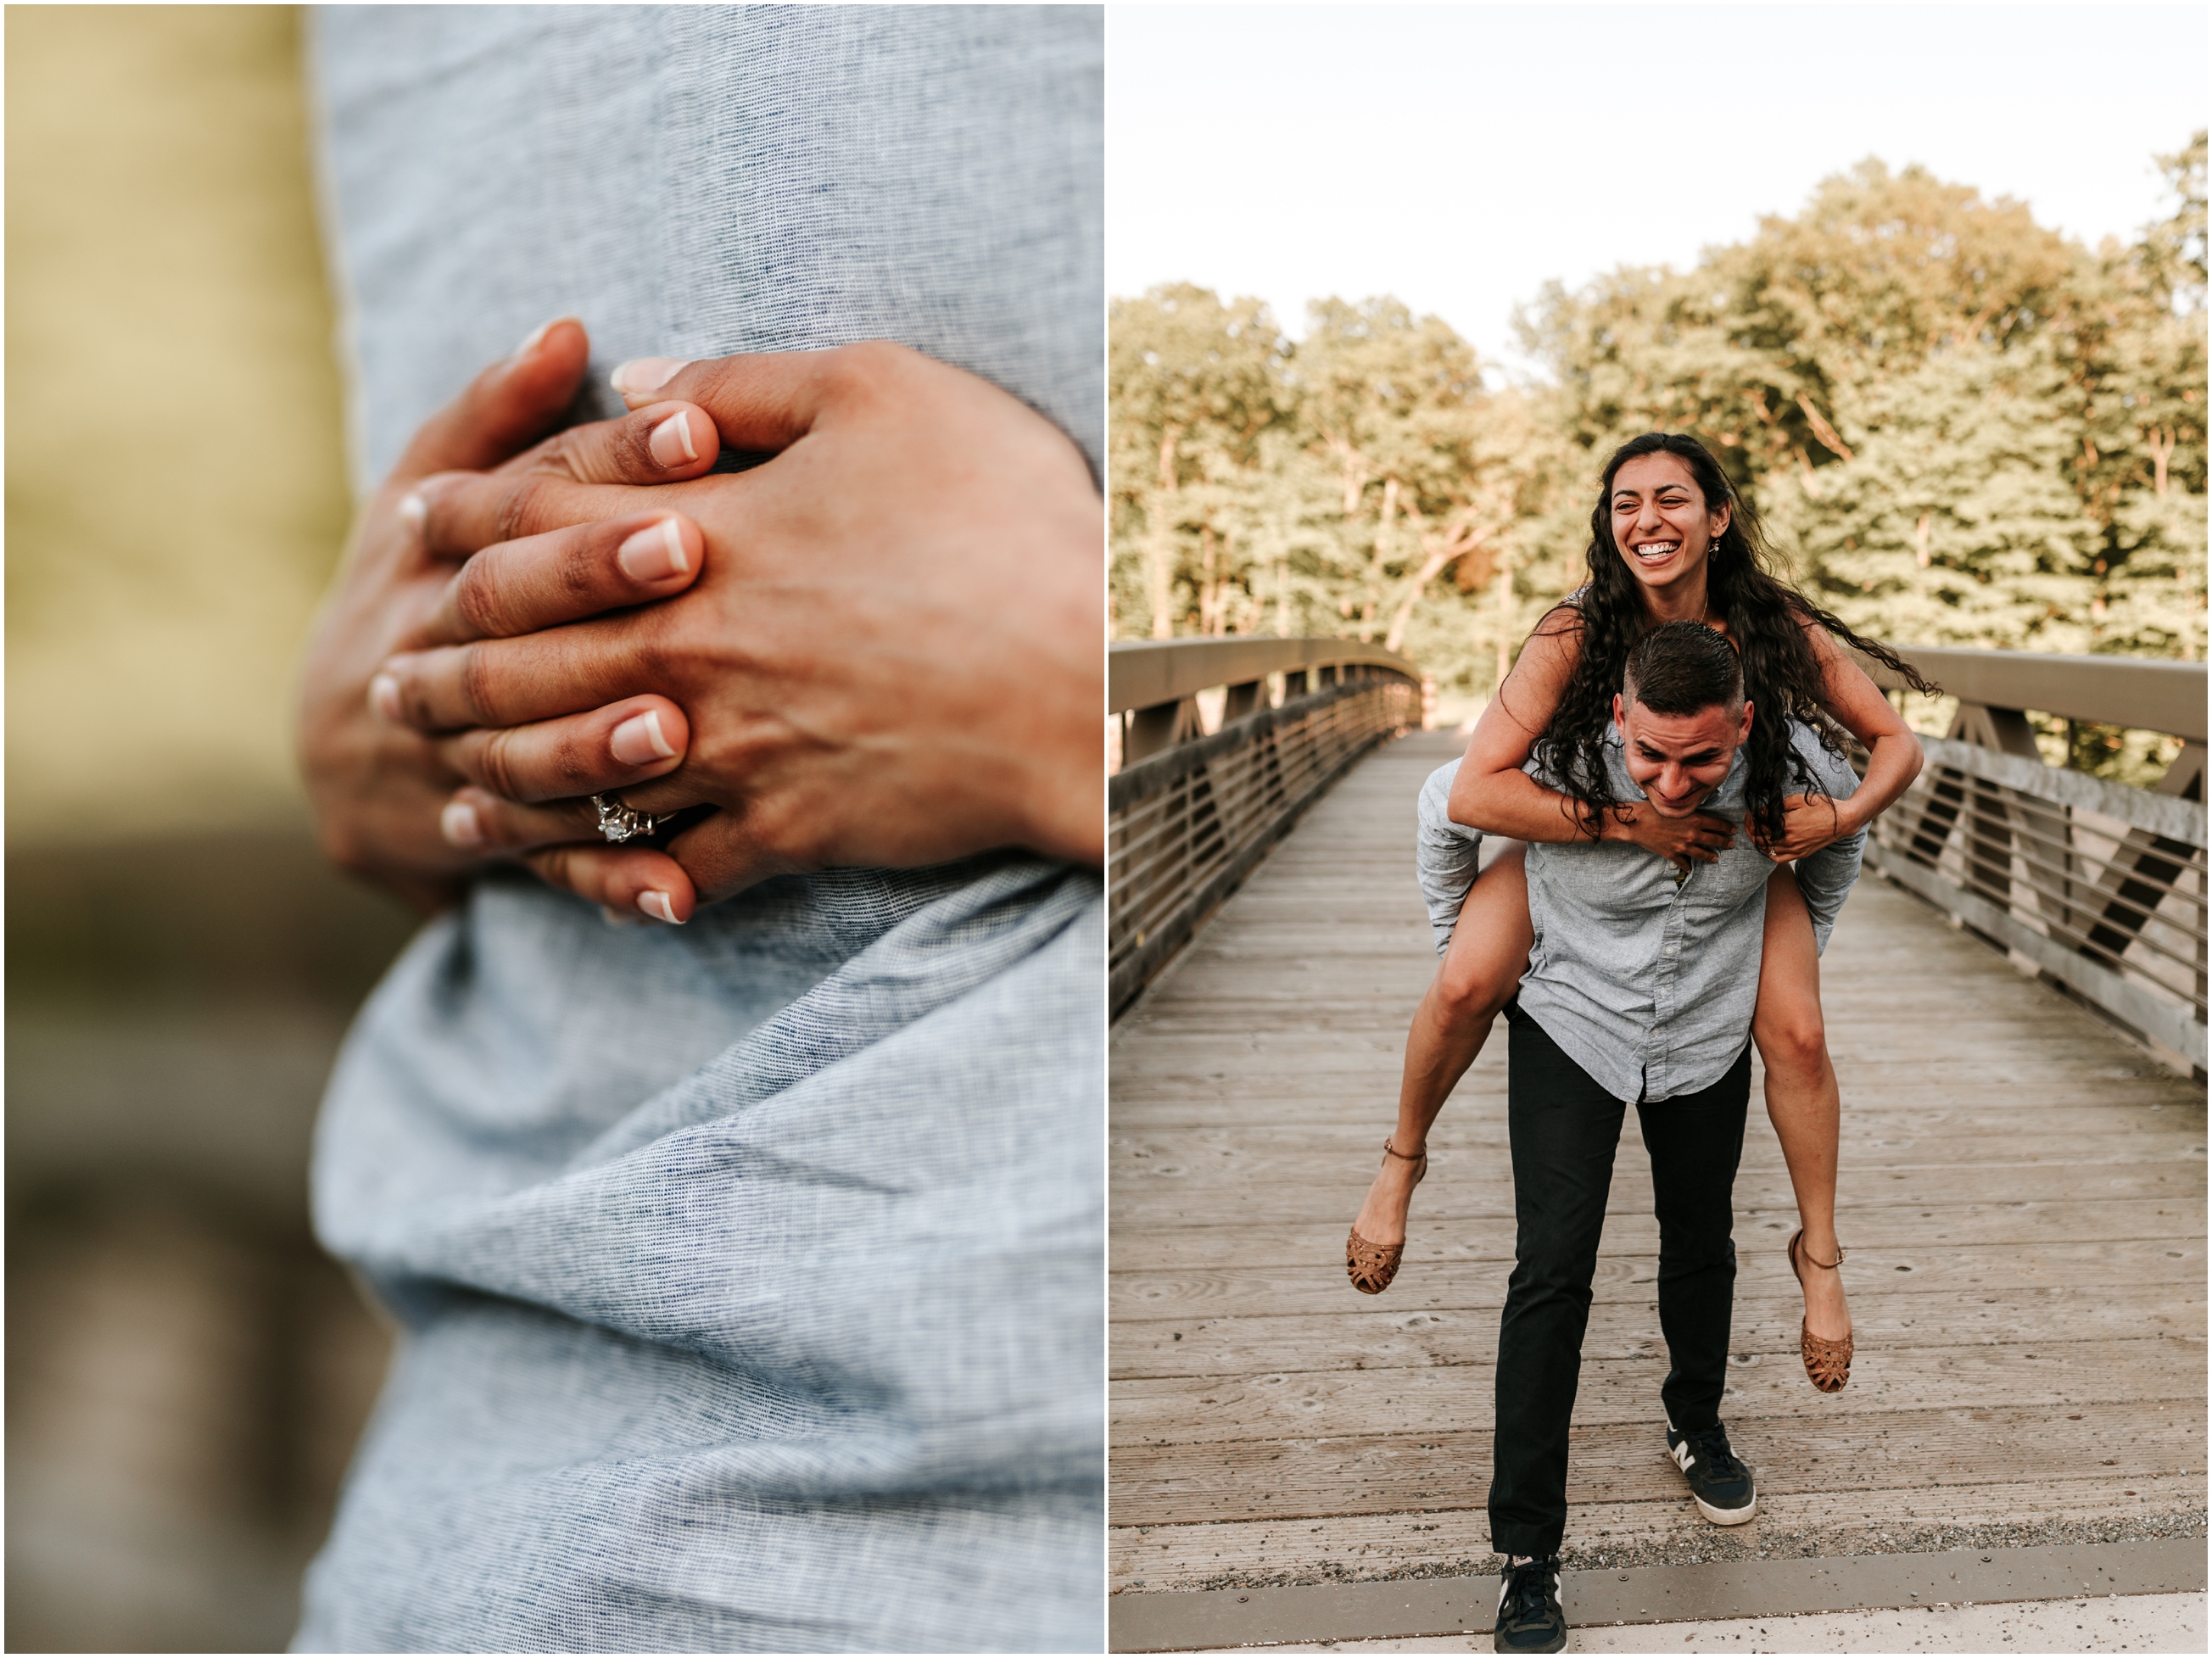 Spring Nature Couple Saffin Pond Mahlon Dickenson Reservation Engagement Session New Jersey Wedding Photographer